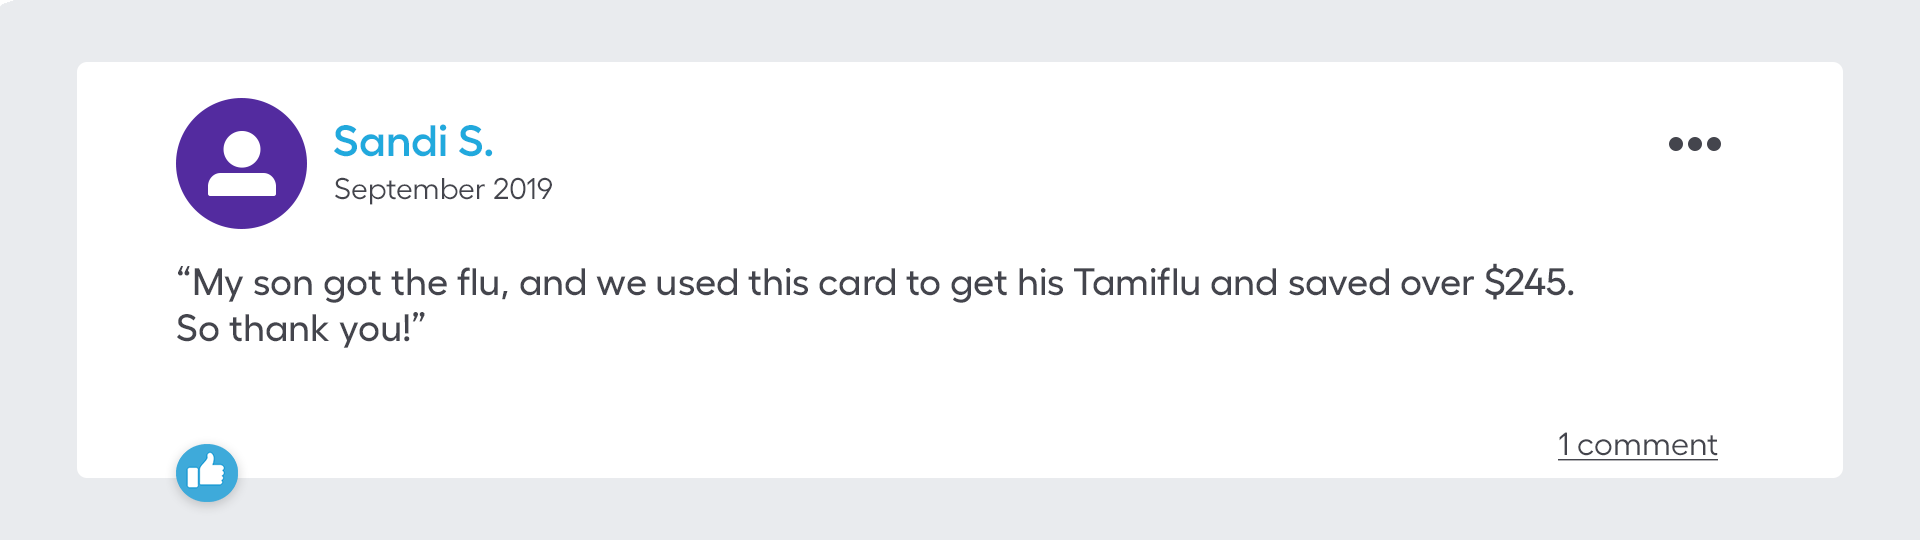 My son got the flu, and we used this card to get his Tamiflu and saved over $245. So thank you!